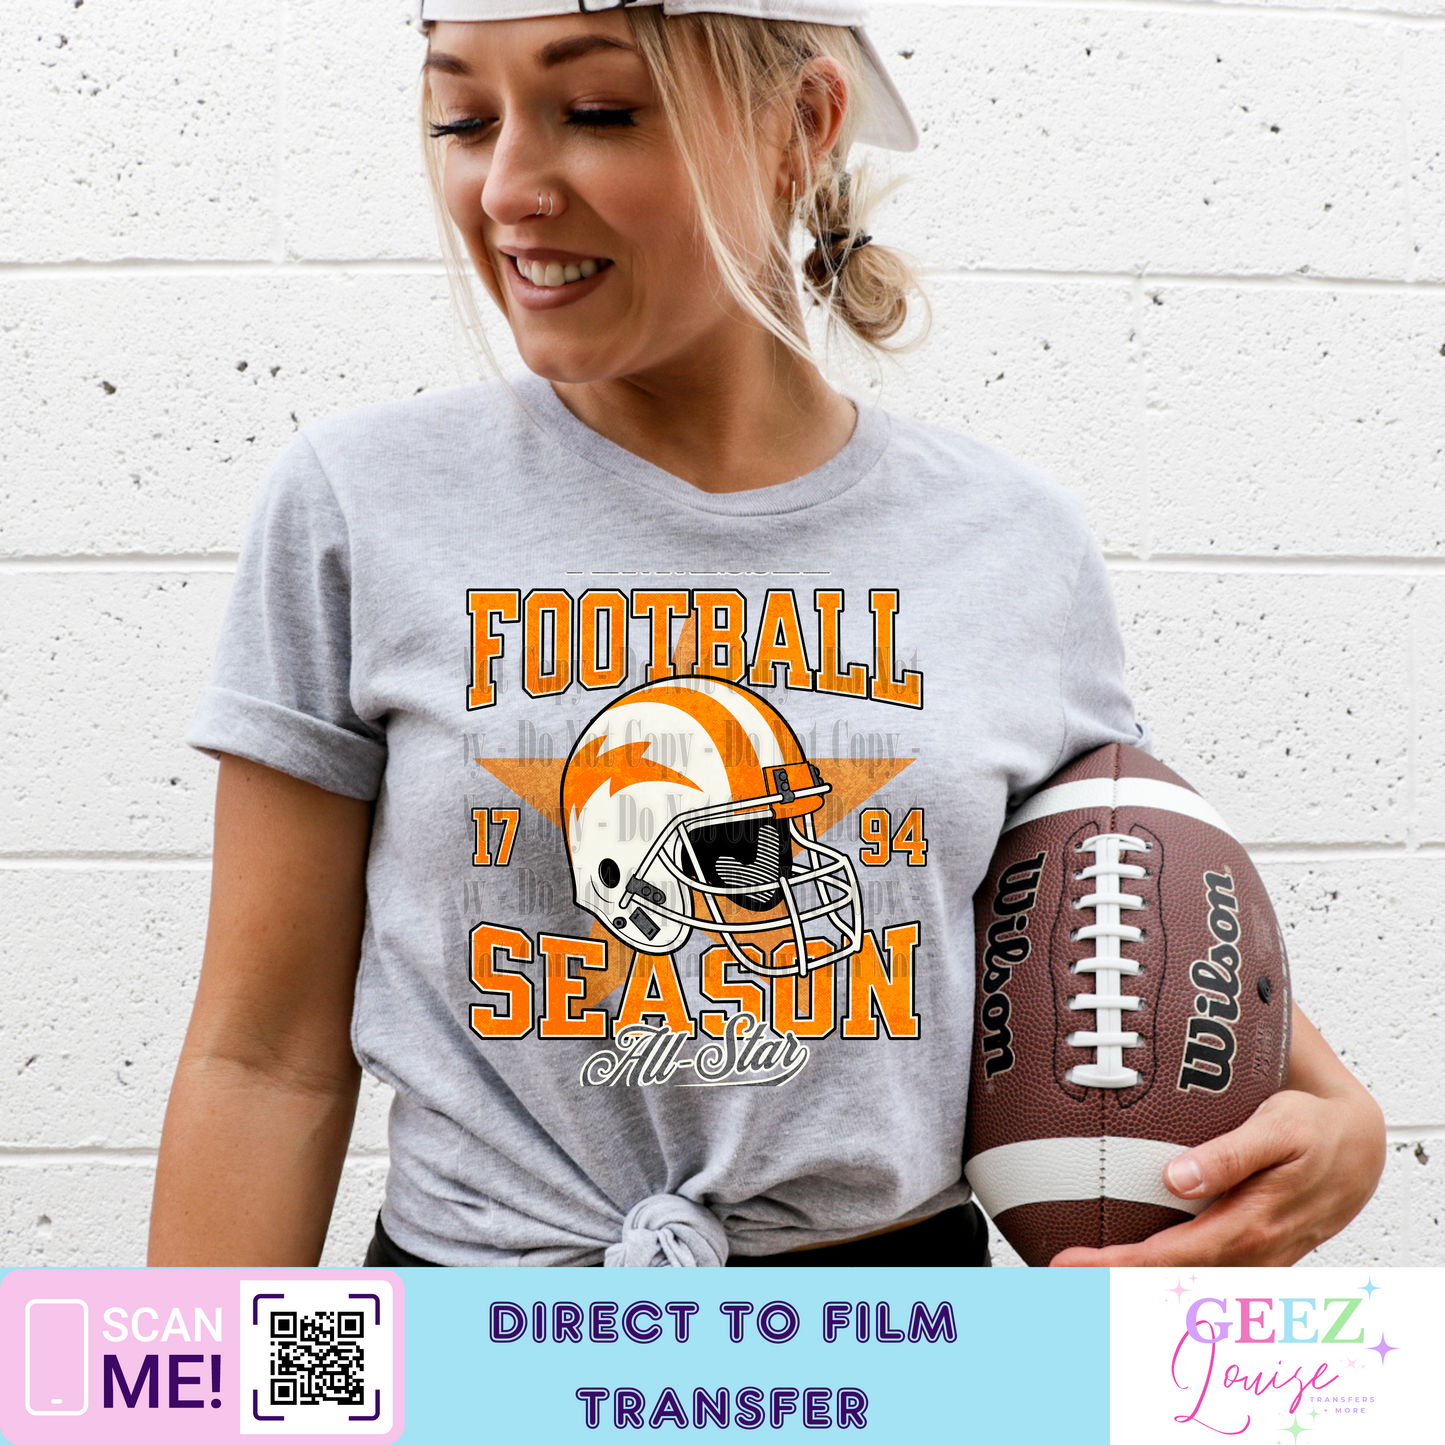 Tennessee - Direct to Film Transfer - made to order